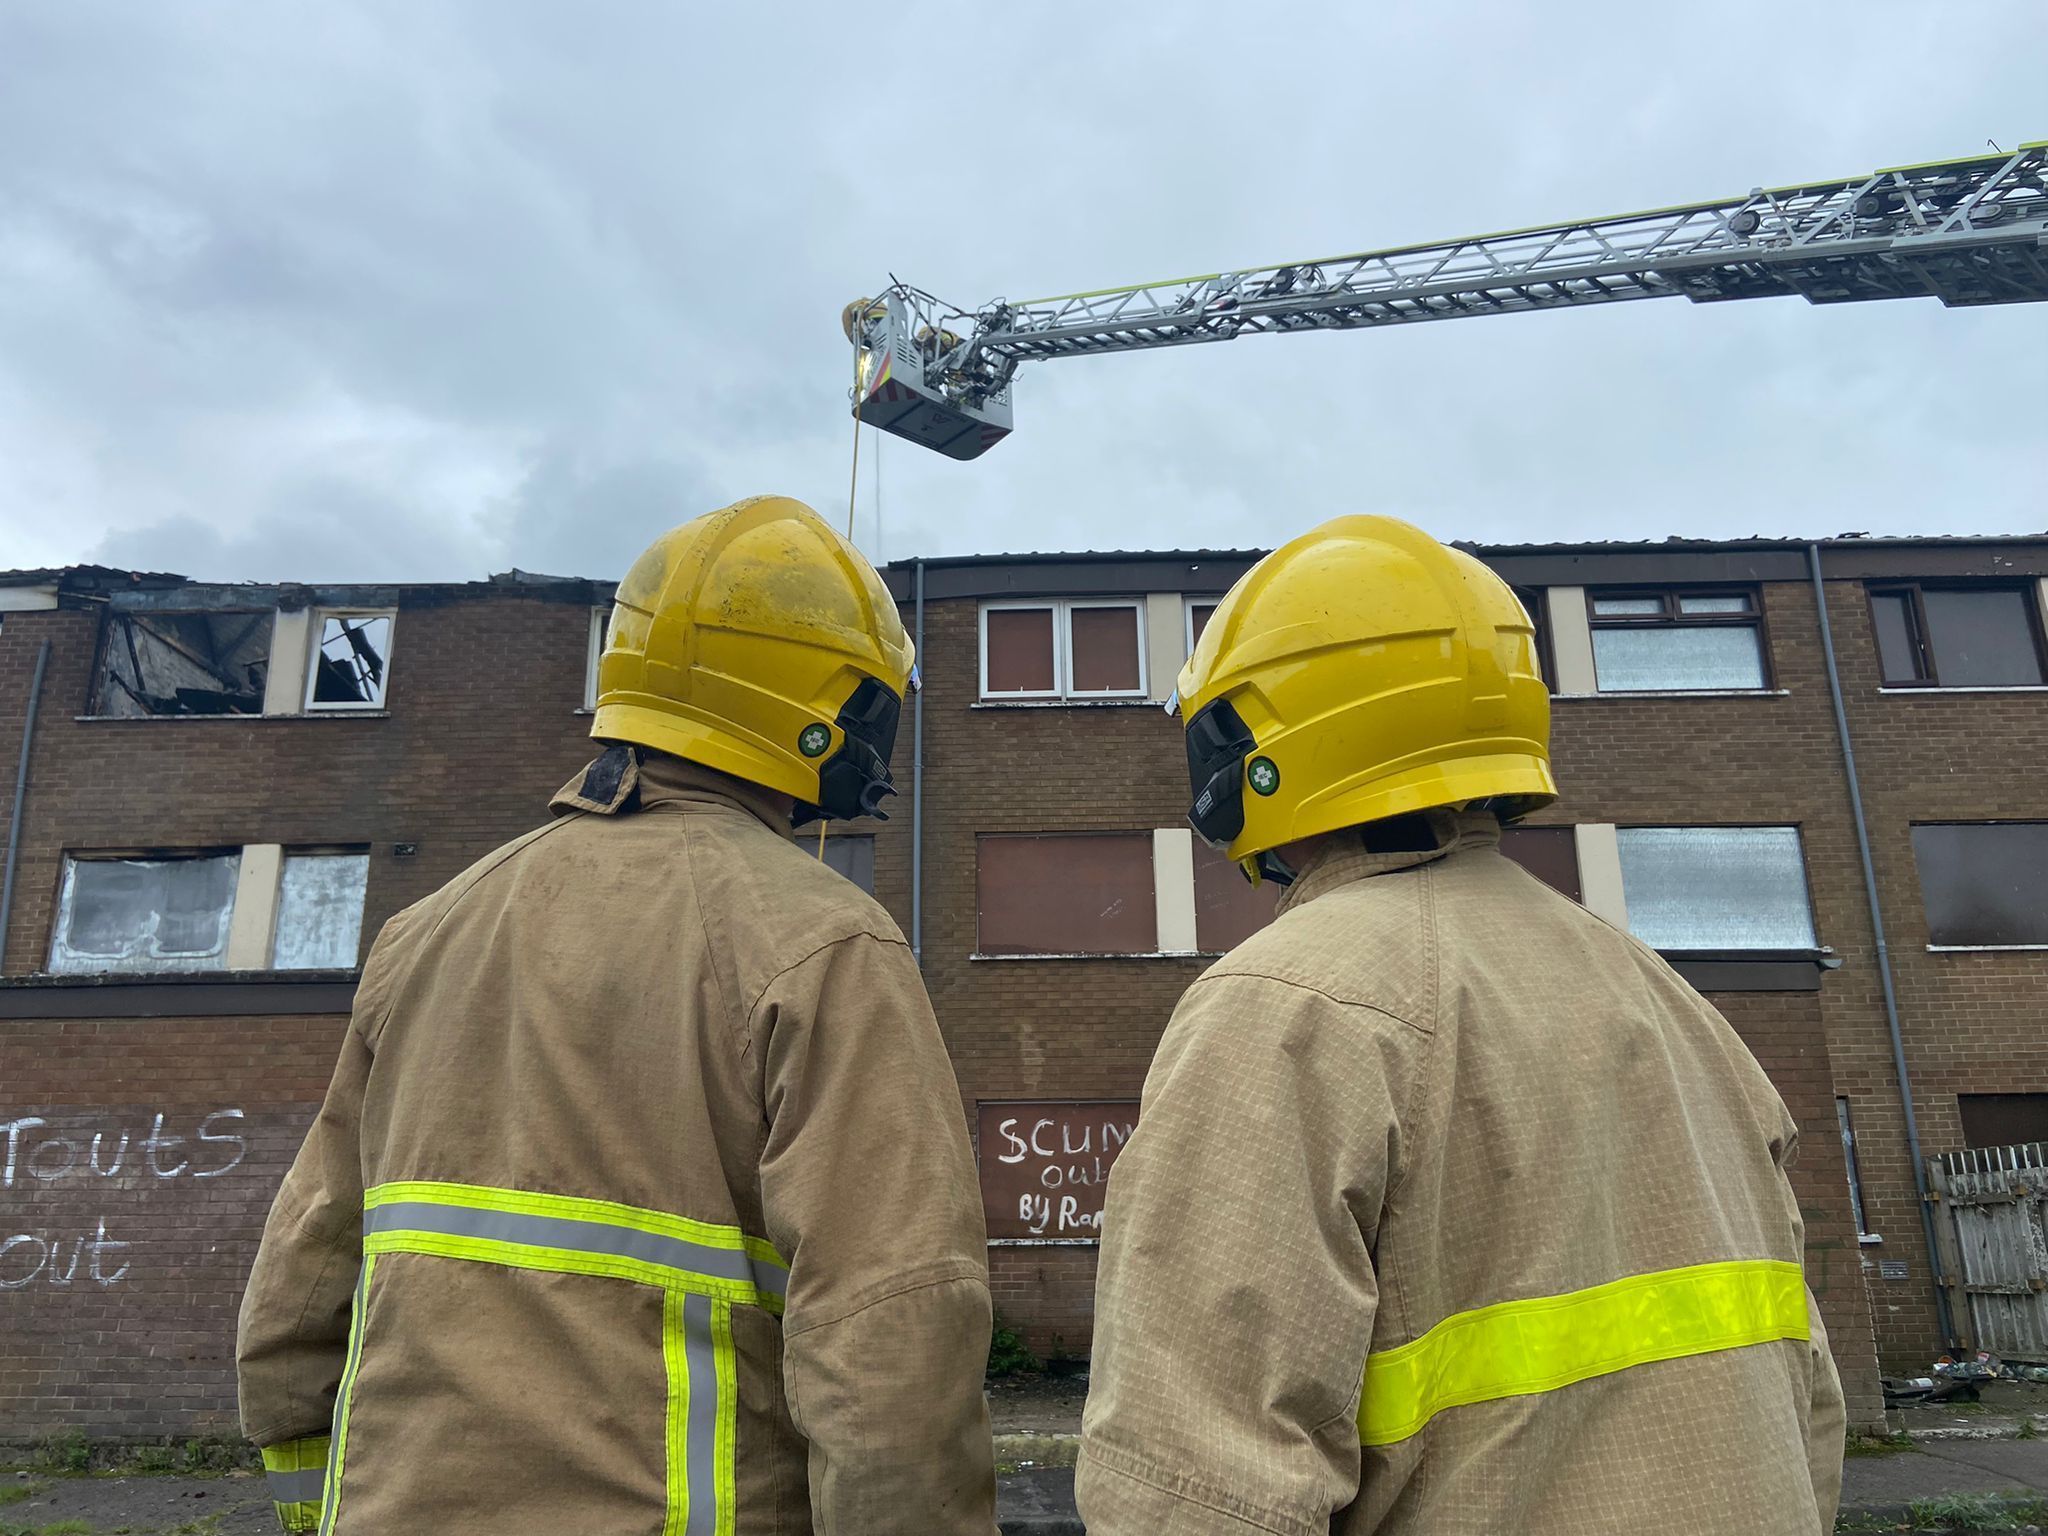 KEEPING PEOPLE SAFE: Firefighters at the scene of an earlier fire at Ross Street flats